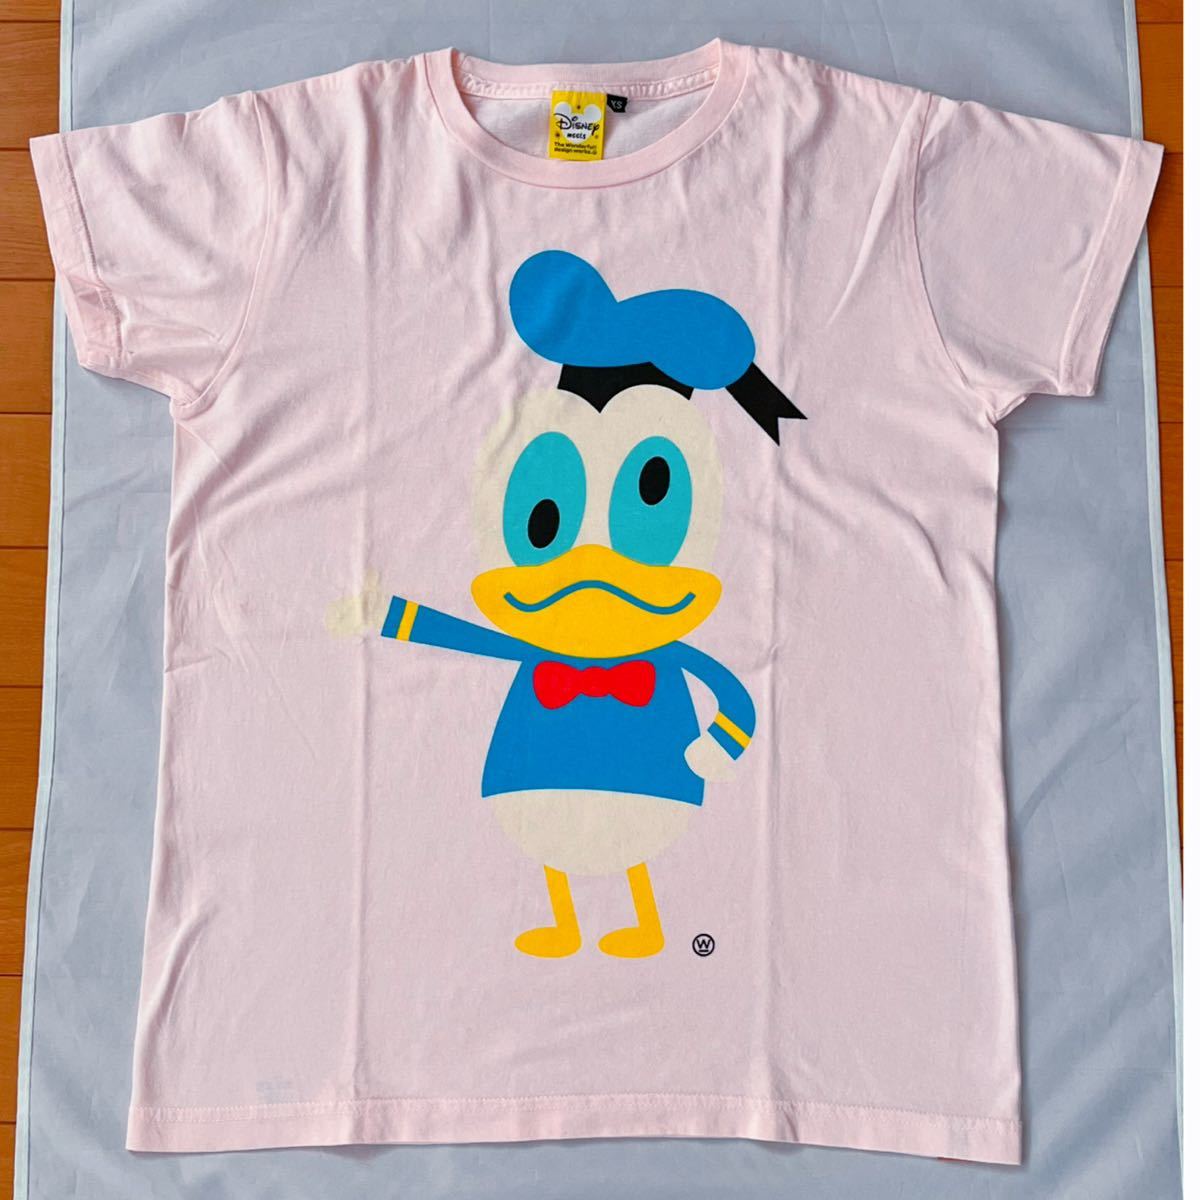 BEAMS T*The Wonderful design works*Disney* Donald Duck * short sleeves T-shirt * lady's *XS size * pink series * unused 